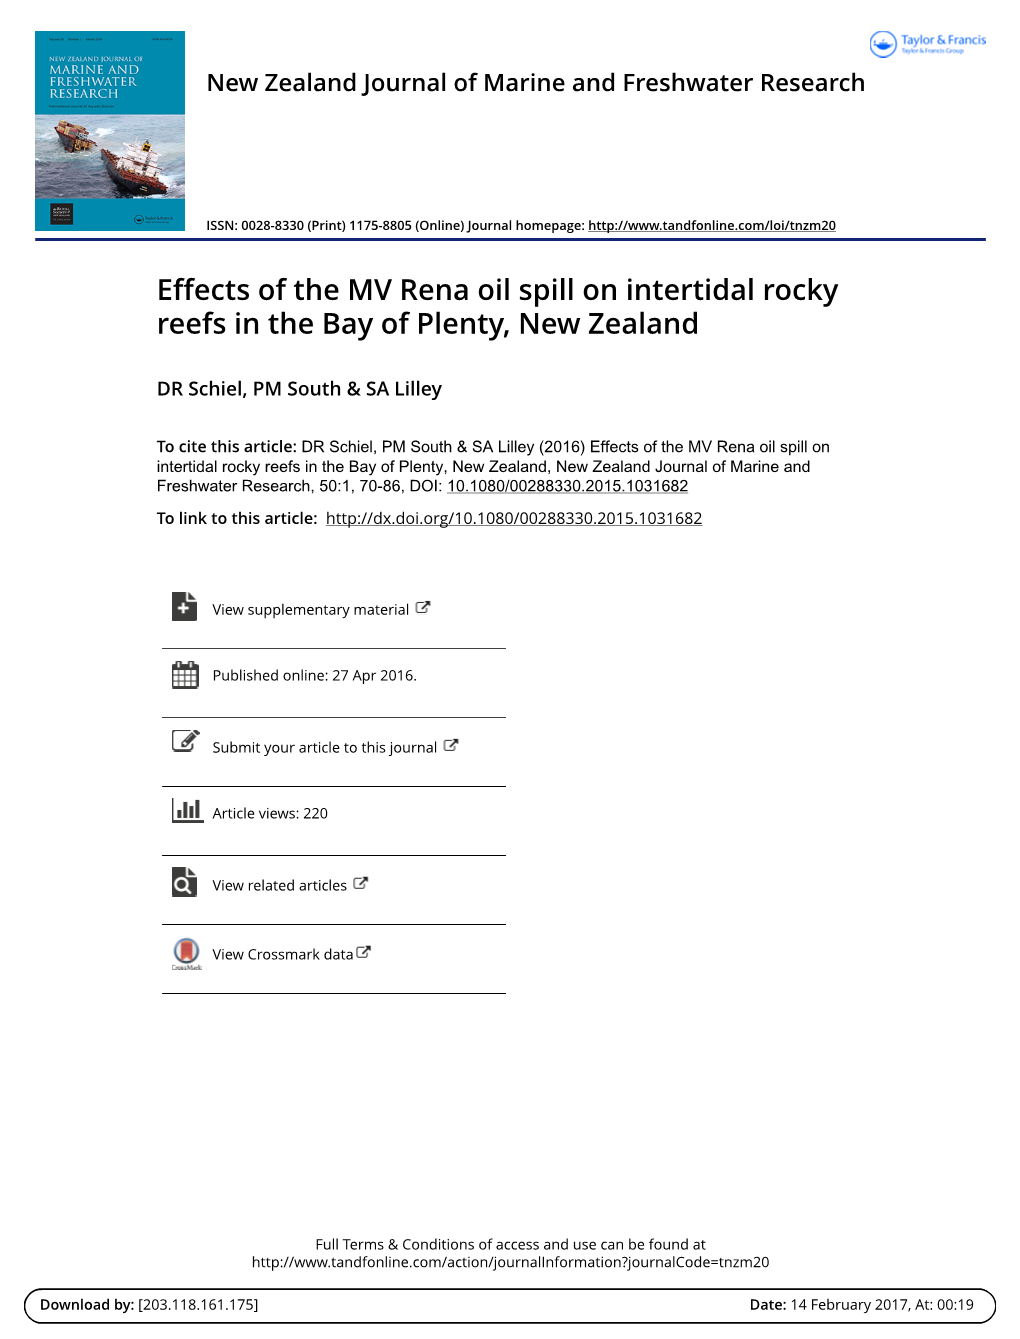 Effects of the CV Rena Oil Spill on Intertidal Rocky Reefs in the Bay Of